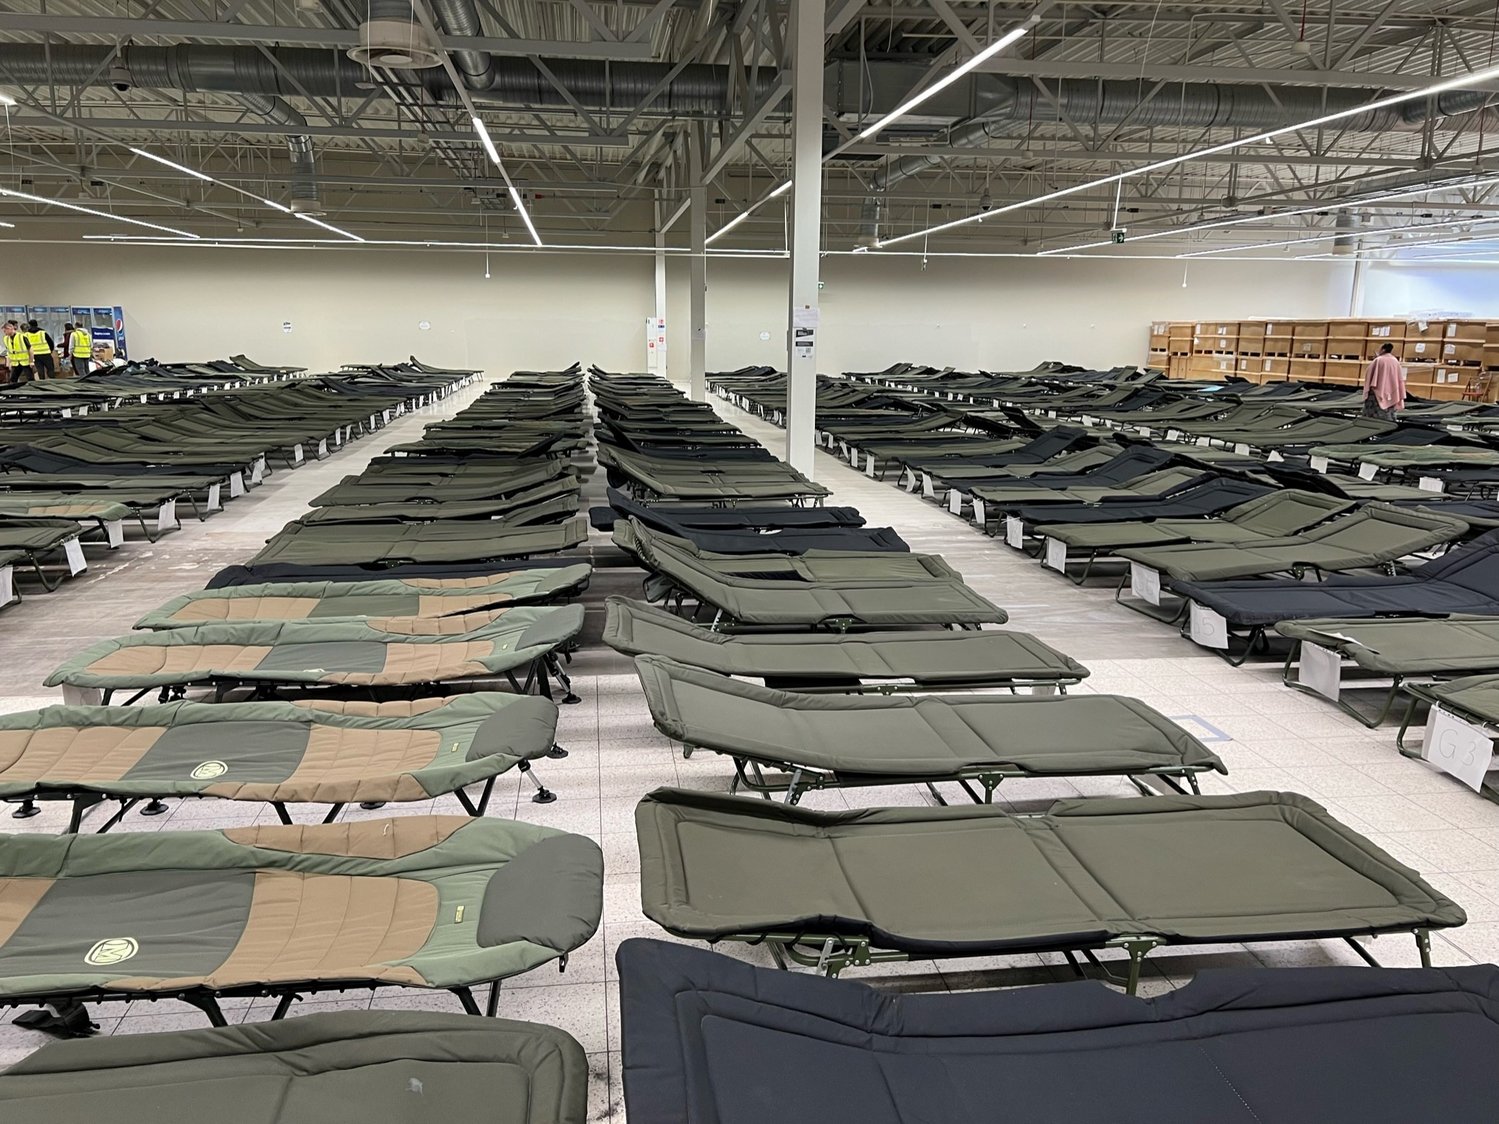 Cots awaited refugees at an absorption center in Przemysl, Poland.